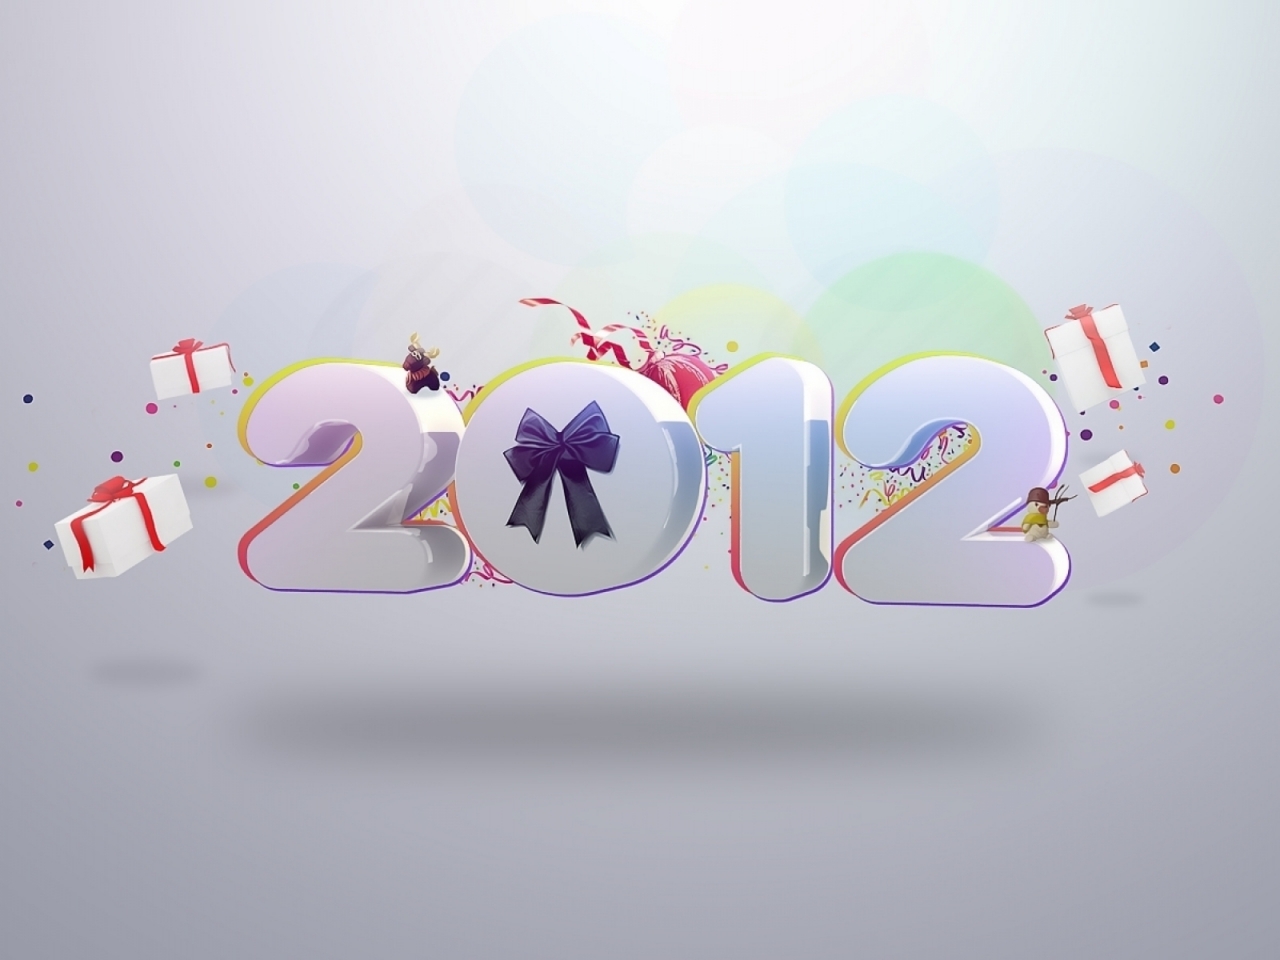 2012 Year Celebration for 1280 x 960 resolution